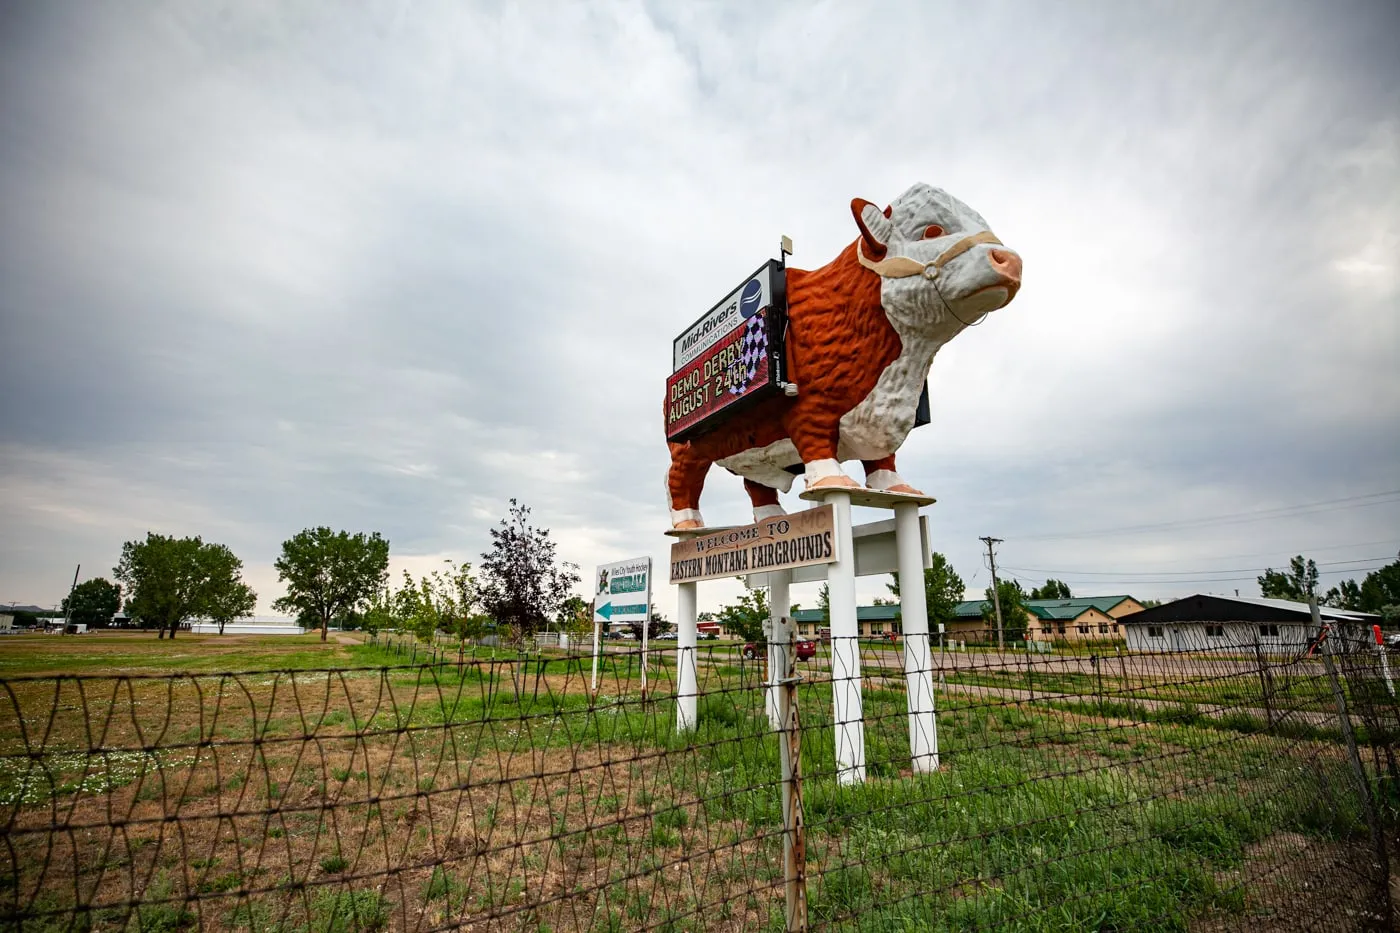 Giant Bull at the Eastern Montana Fairgrounds in Miles City Montana - Montana Roadside Attractions